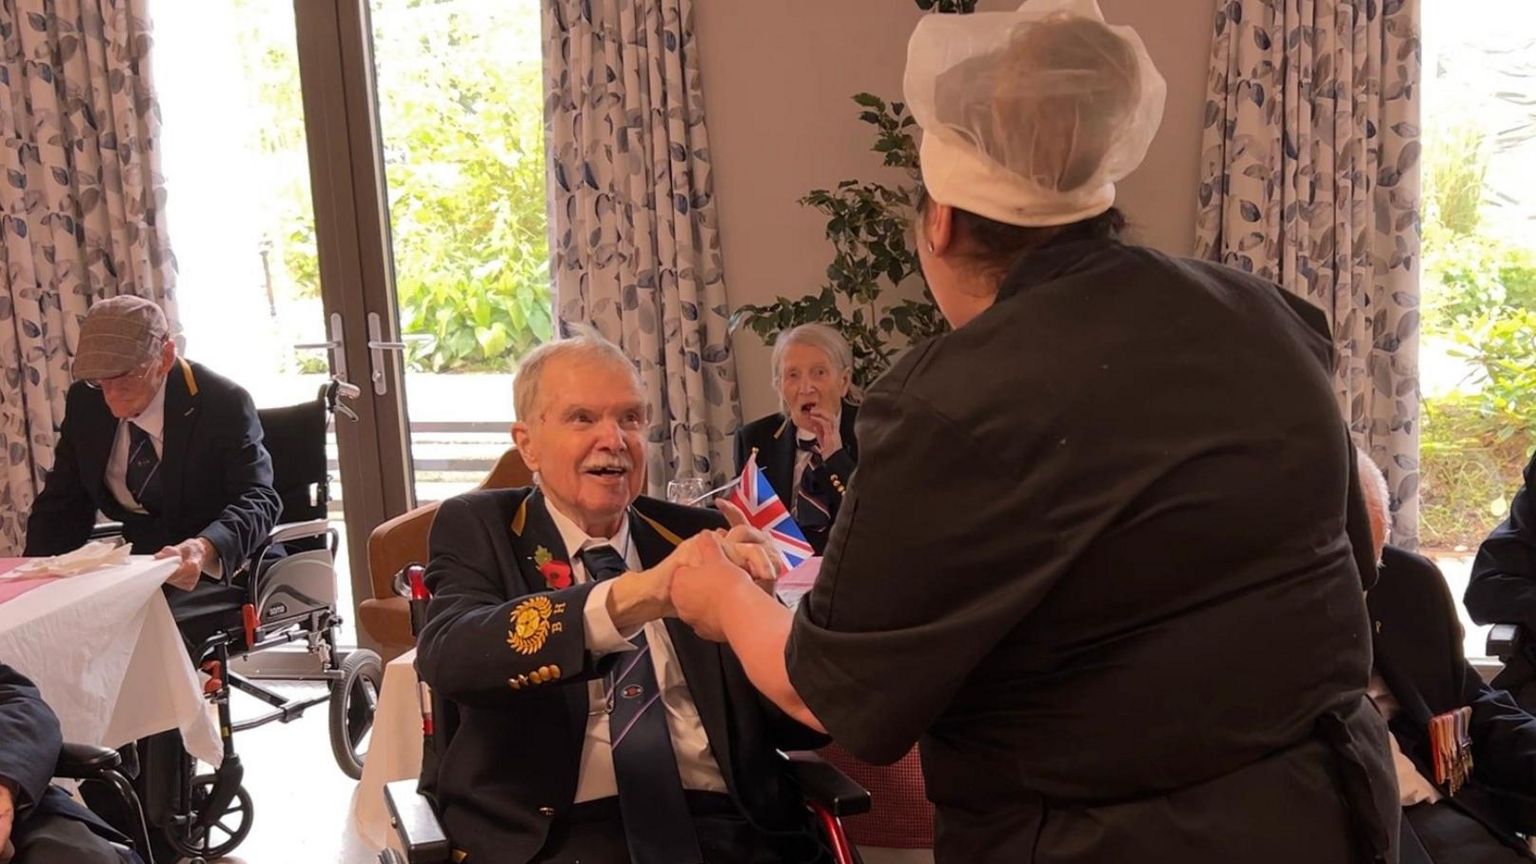 Veterans and care home staff at an event